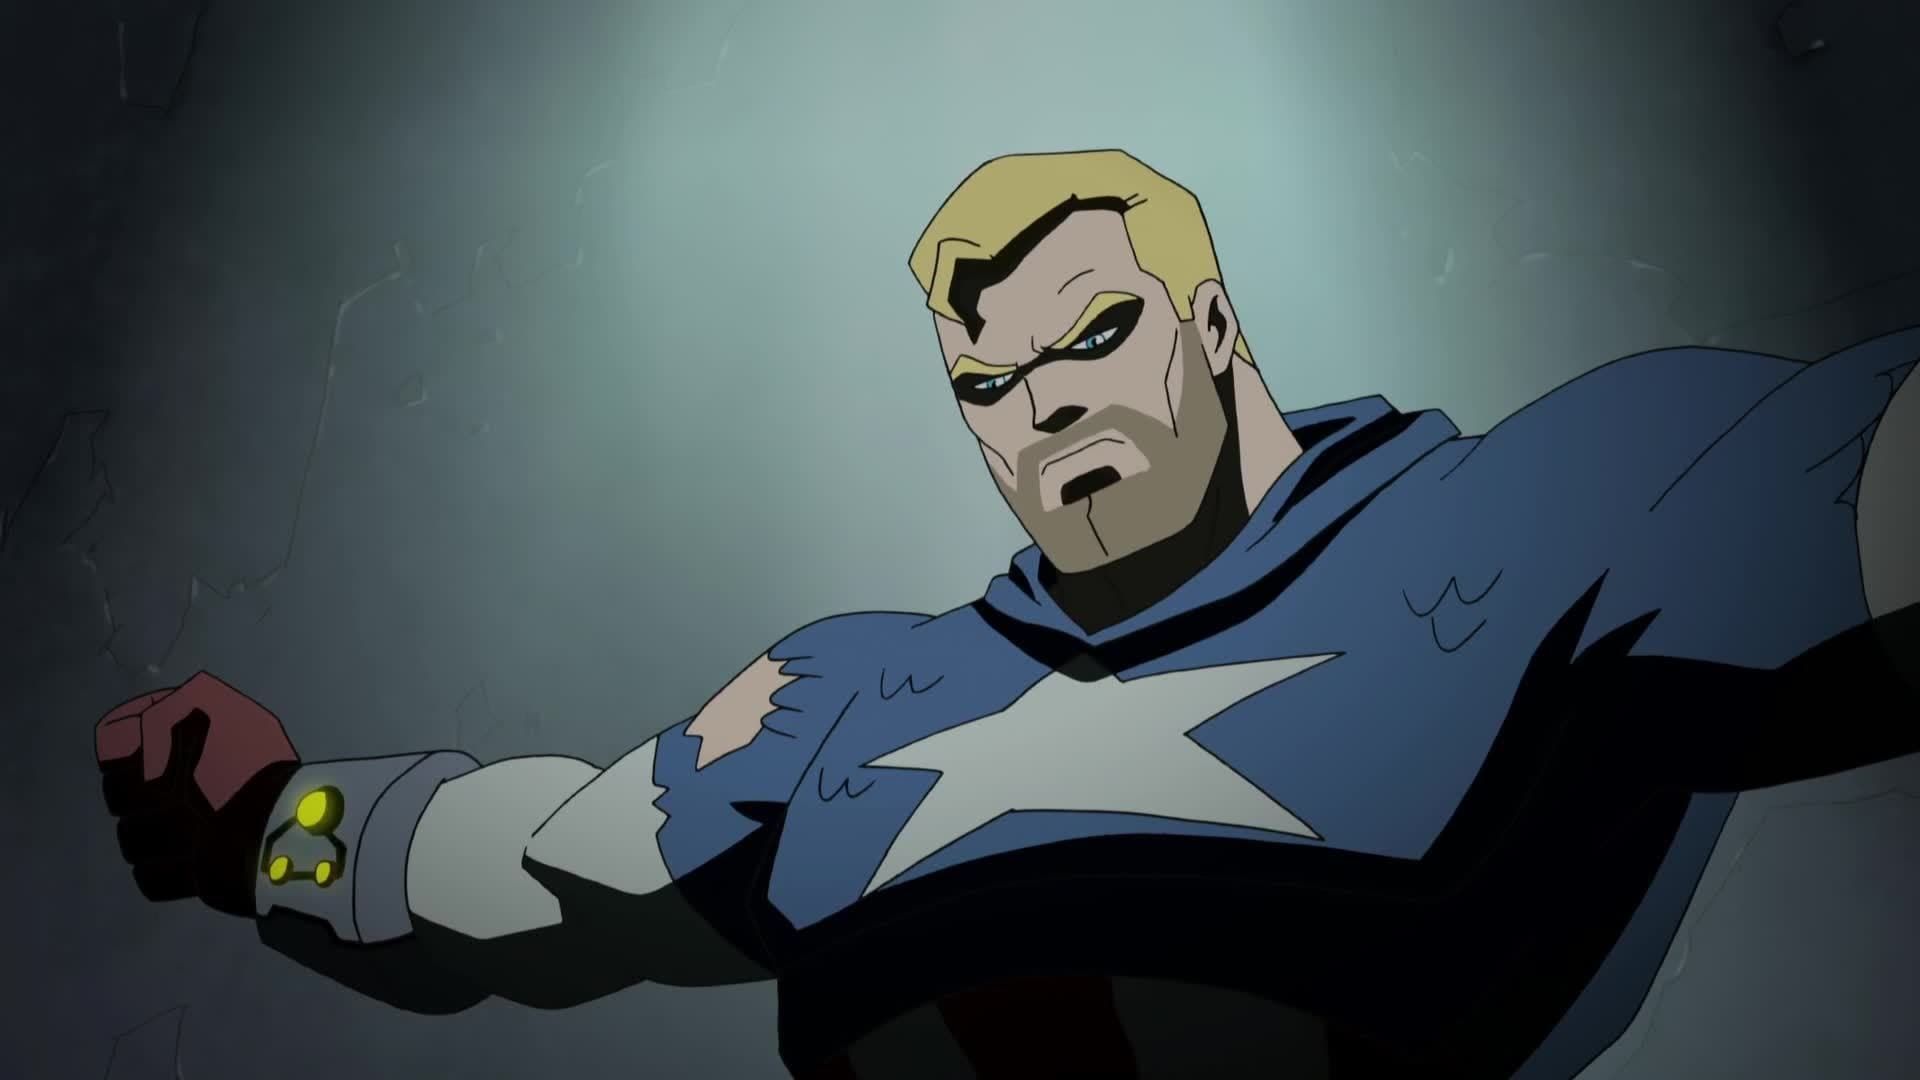 The Avengers: Earth's Mightiest Heroes background